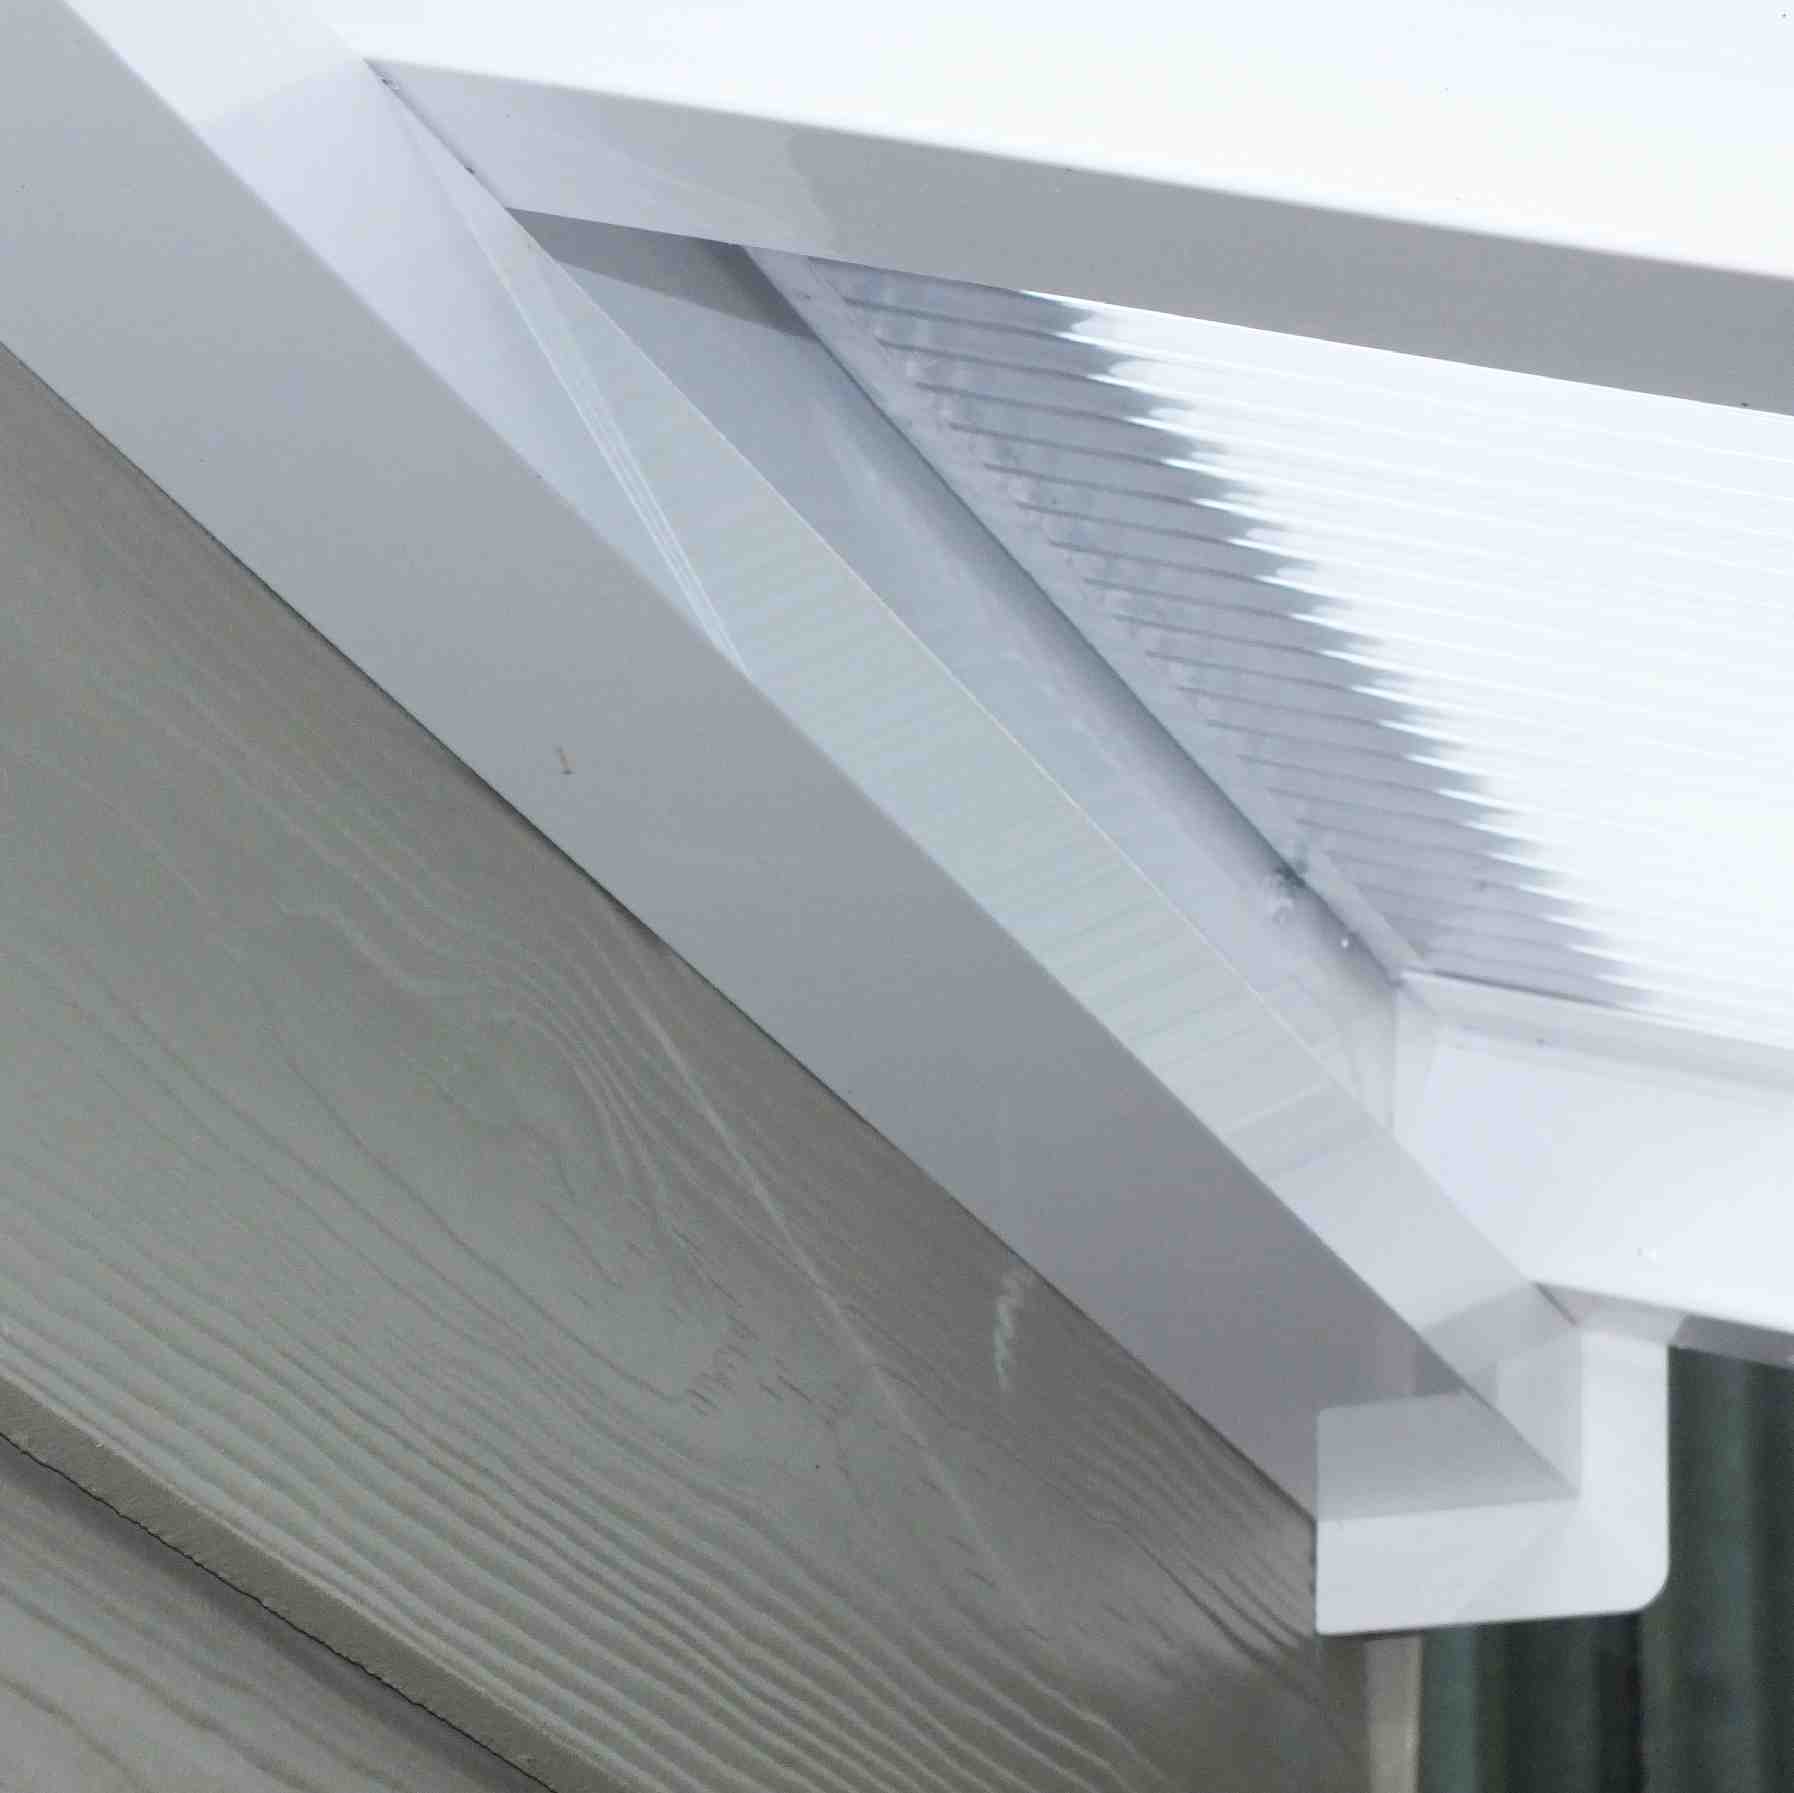 Great deals on Omega Verandah White with 6mm Glass Clear Plate Polycarbonate Glazing - 7.0m (W) x 1.5m (P), (4) Supporting Posts